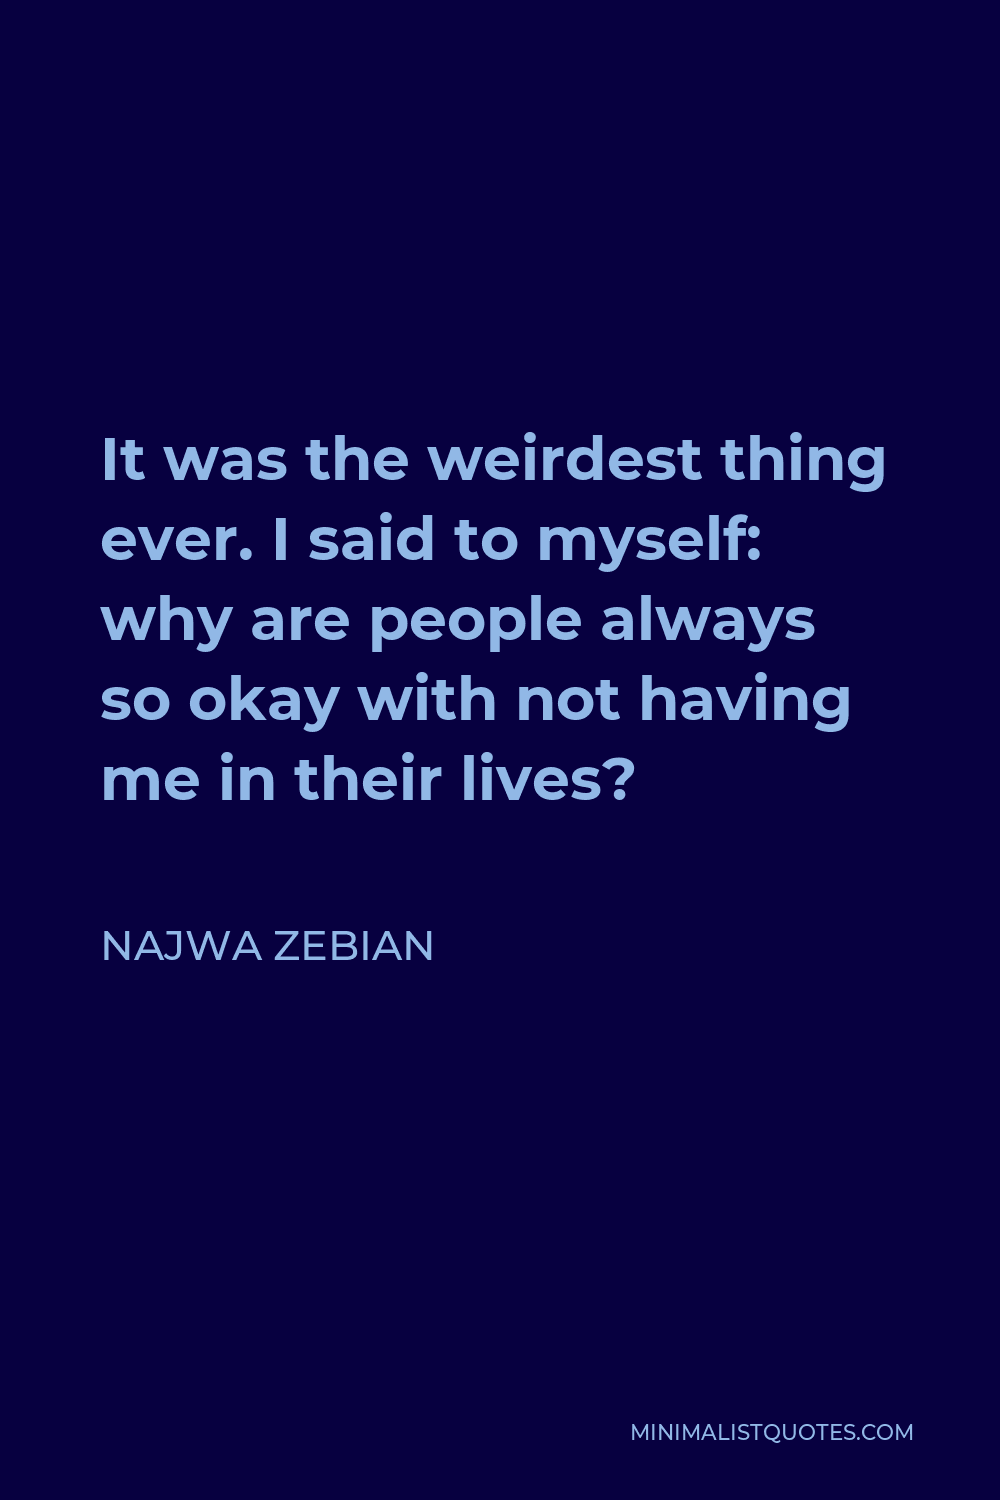 Najwa Zebian Quote - It was the weirdest thing ever. I said to myself: why are people always so okay with not having me in their lives?